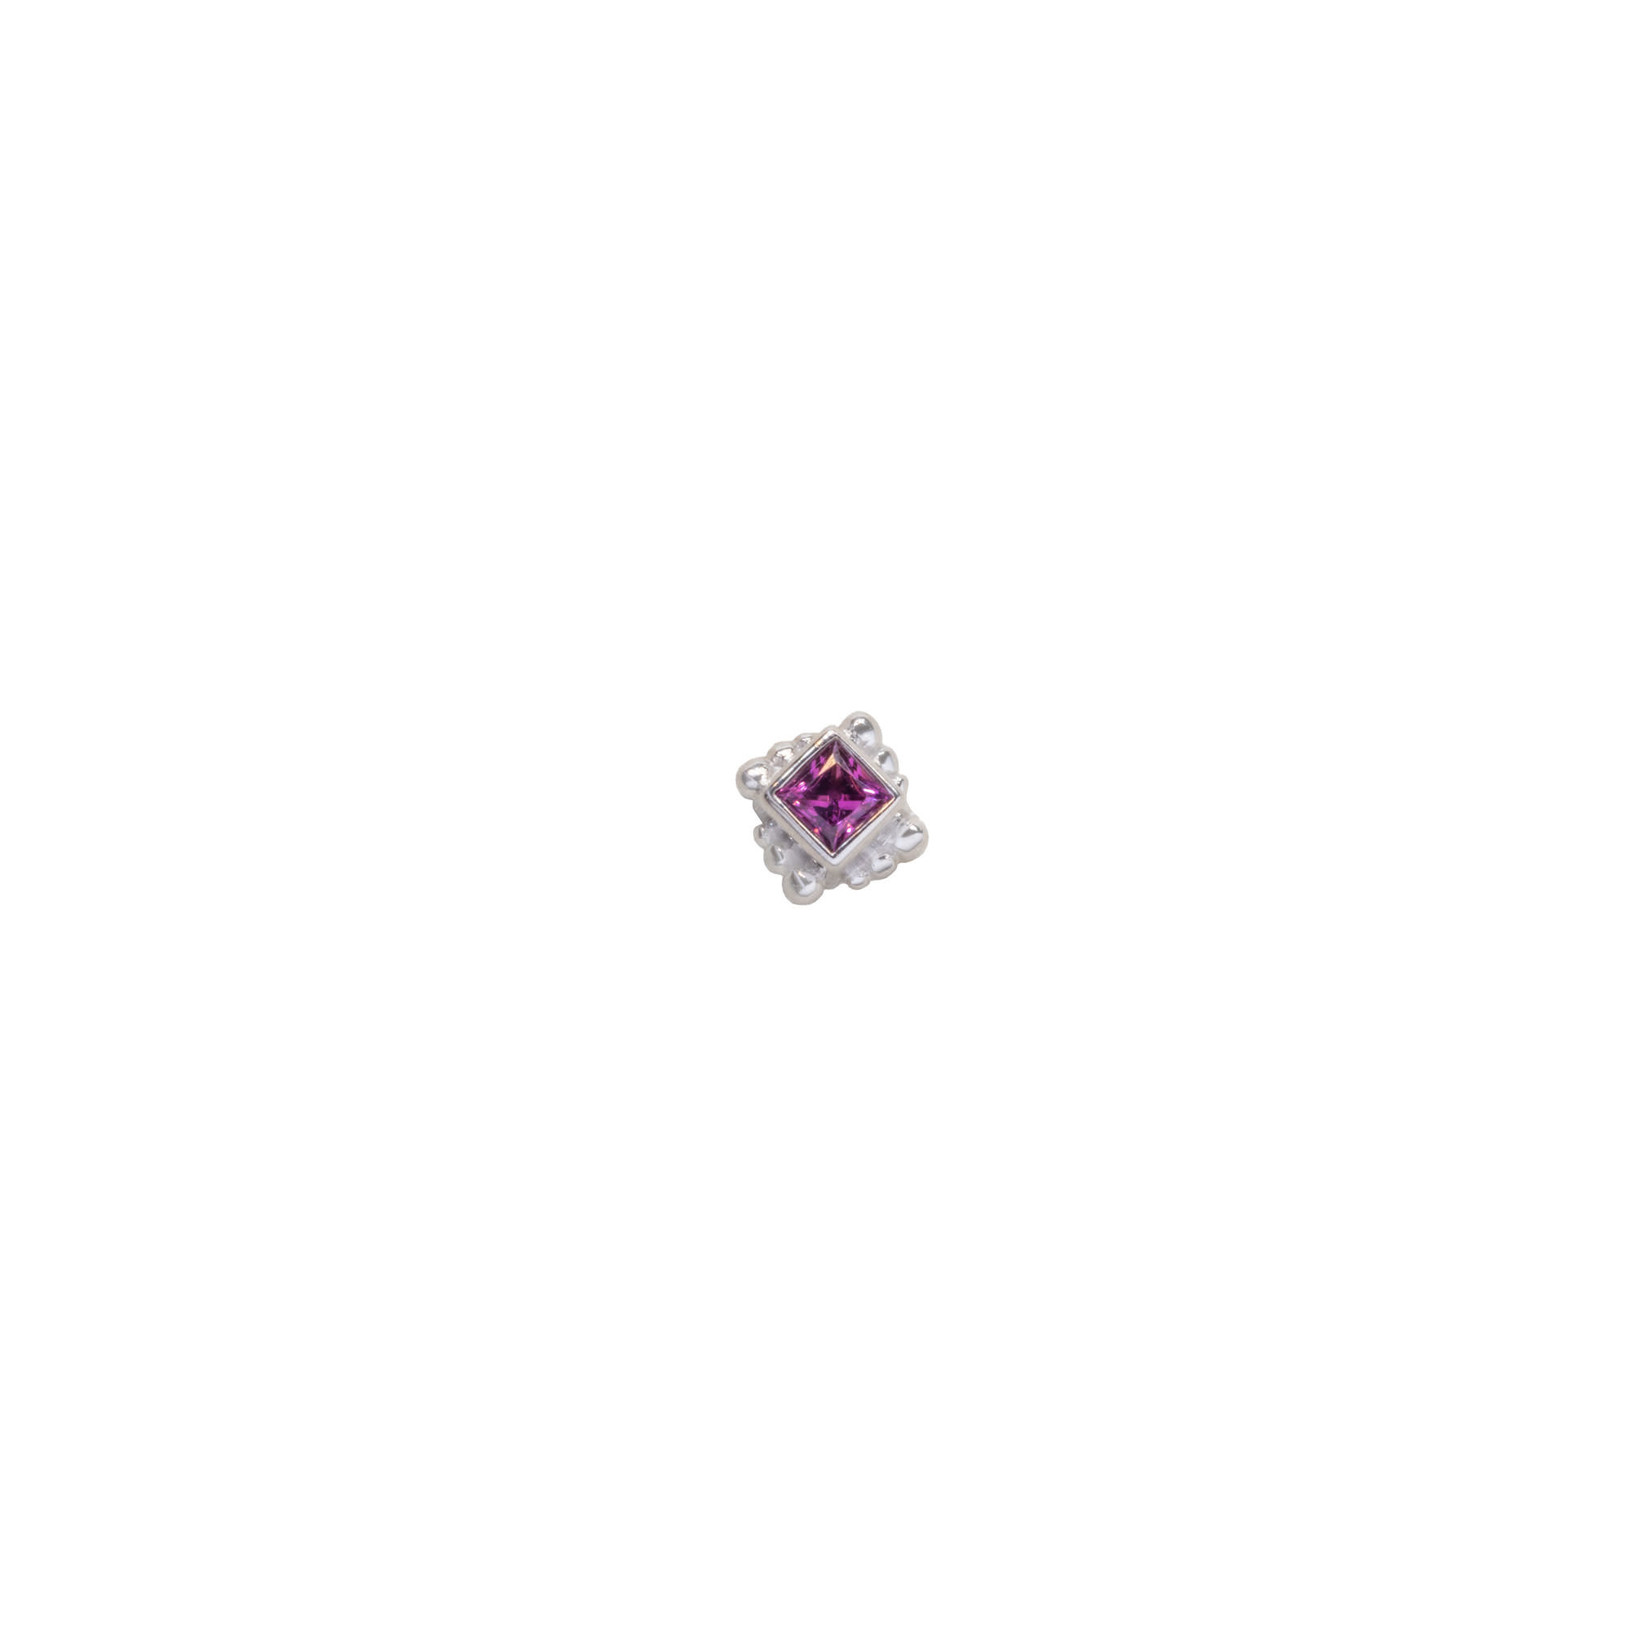 BVLA BVLA white gold "Beaded Princess Bezel" threaded end with 2.0 AA Rhodolite